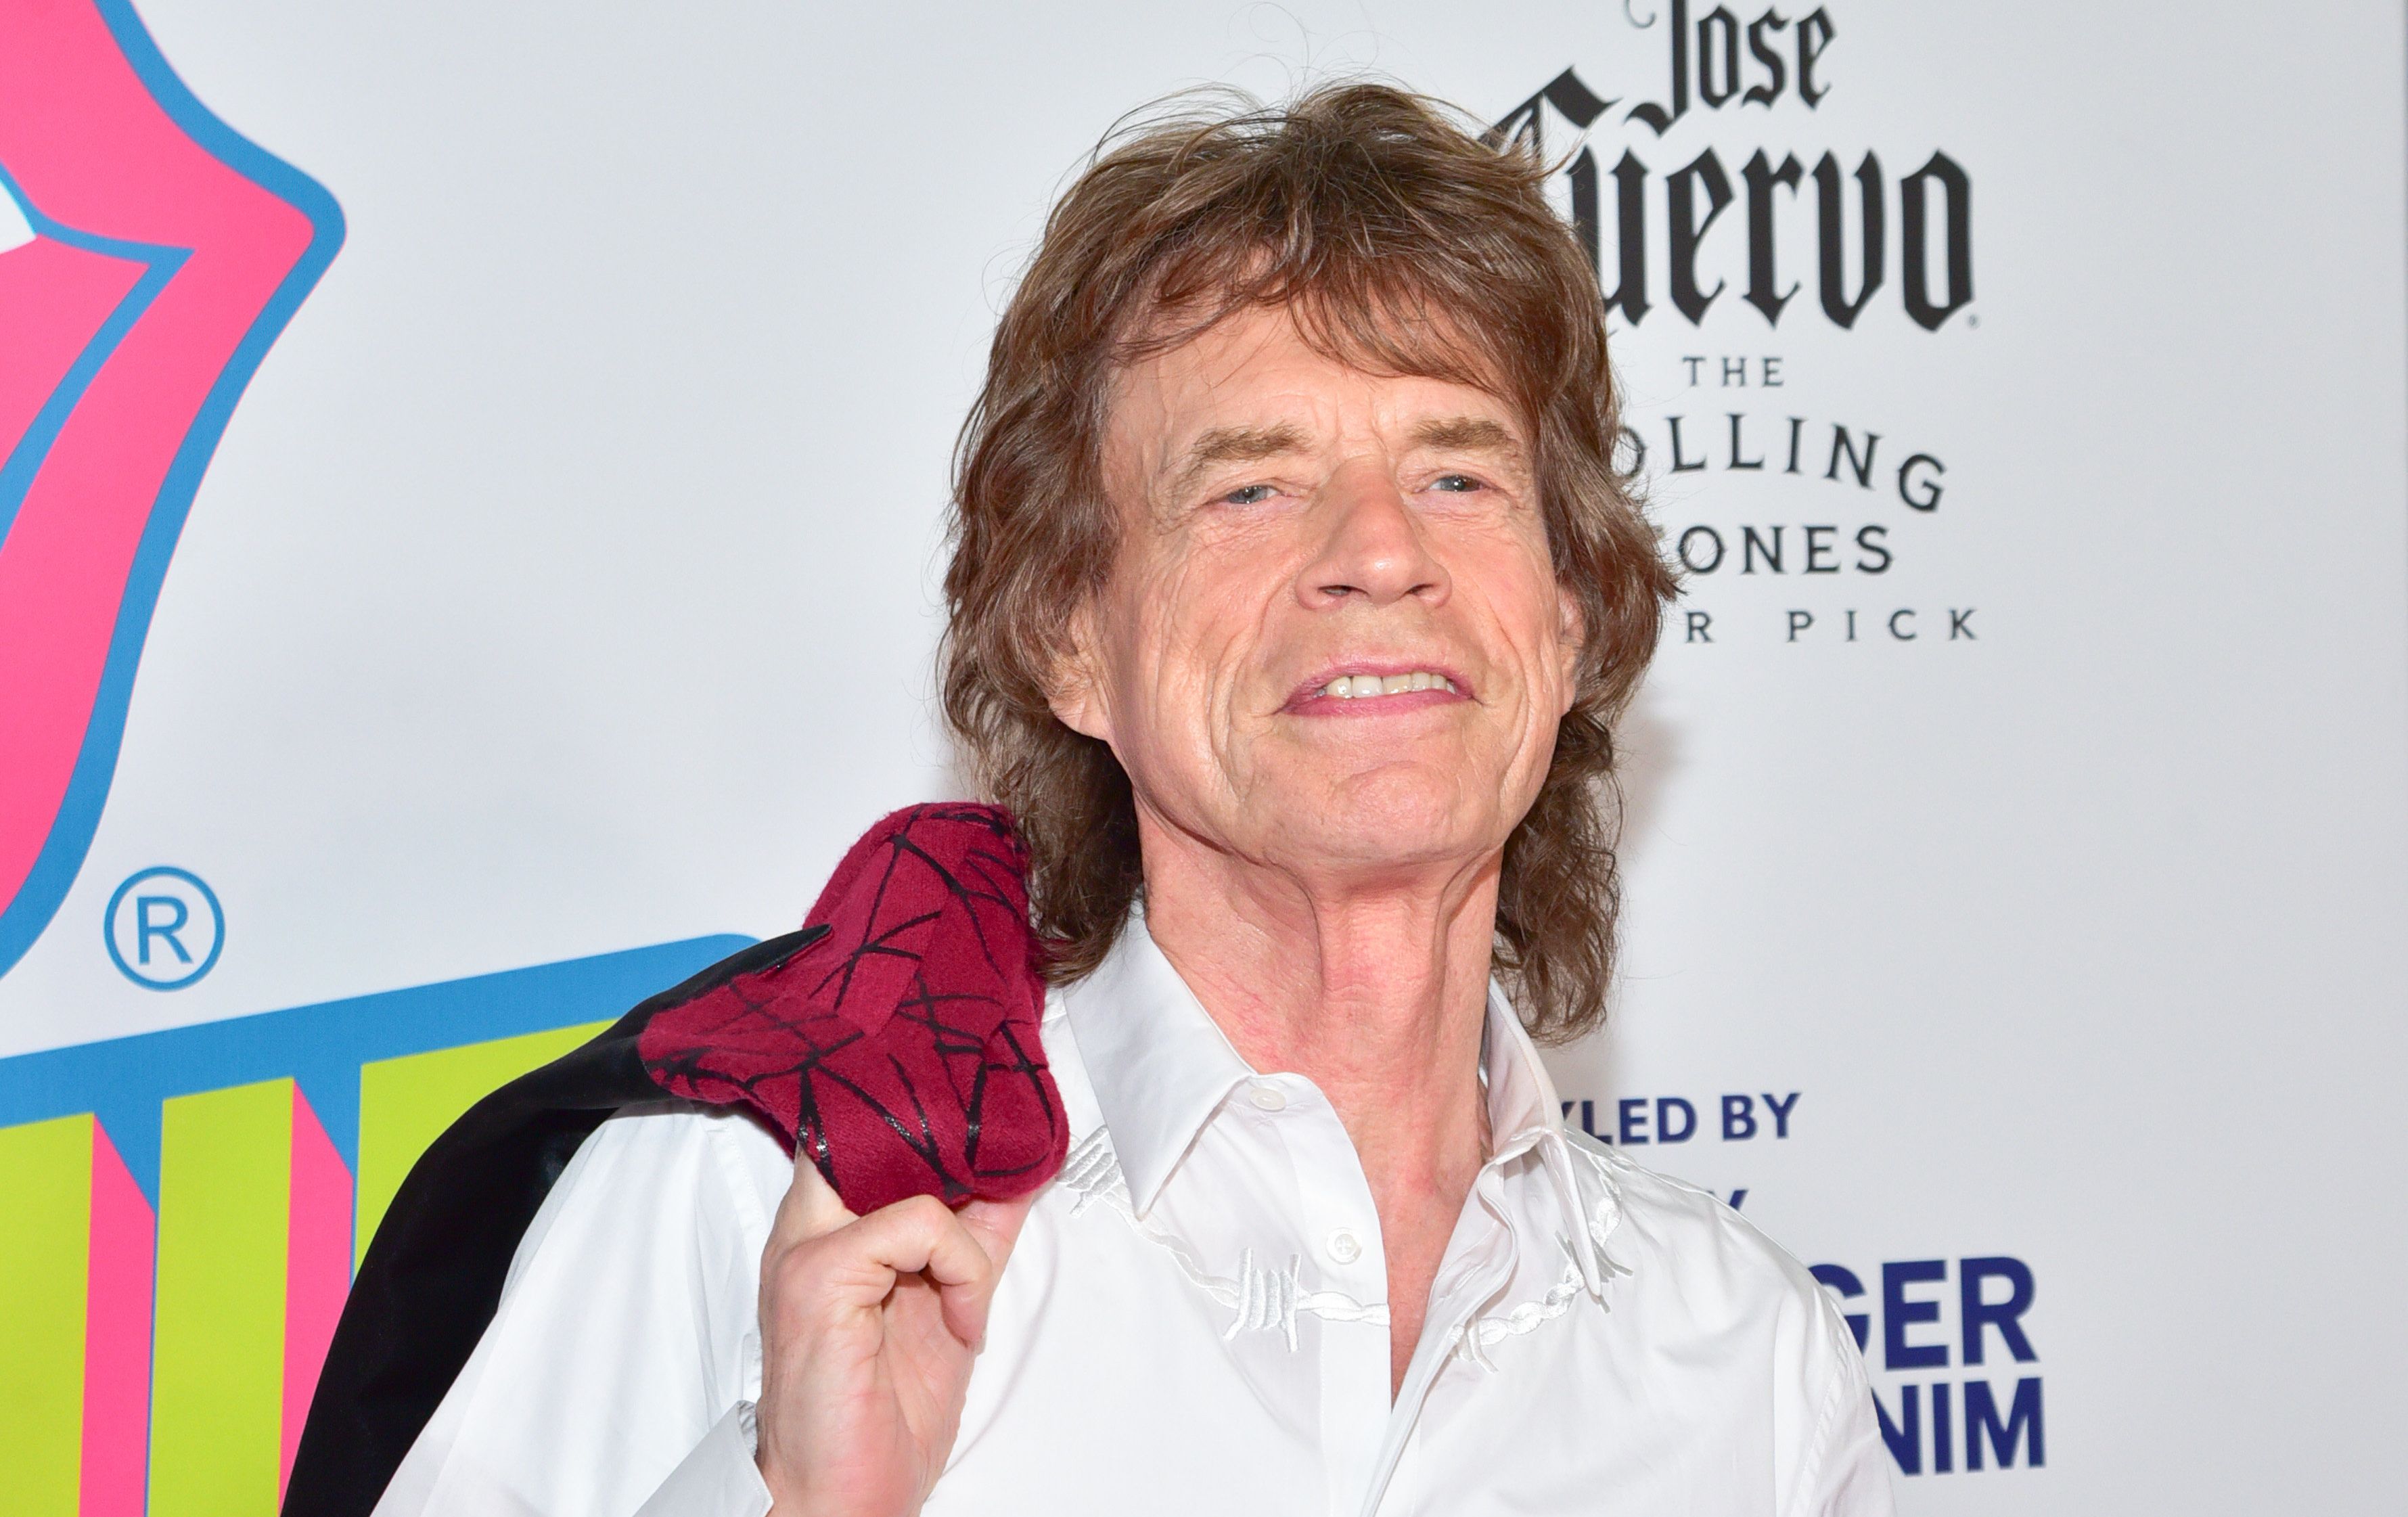 Mick Jagger and girlfriend Melanie Hamrick welcomed their first child together.&nbsp;